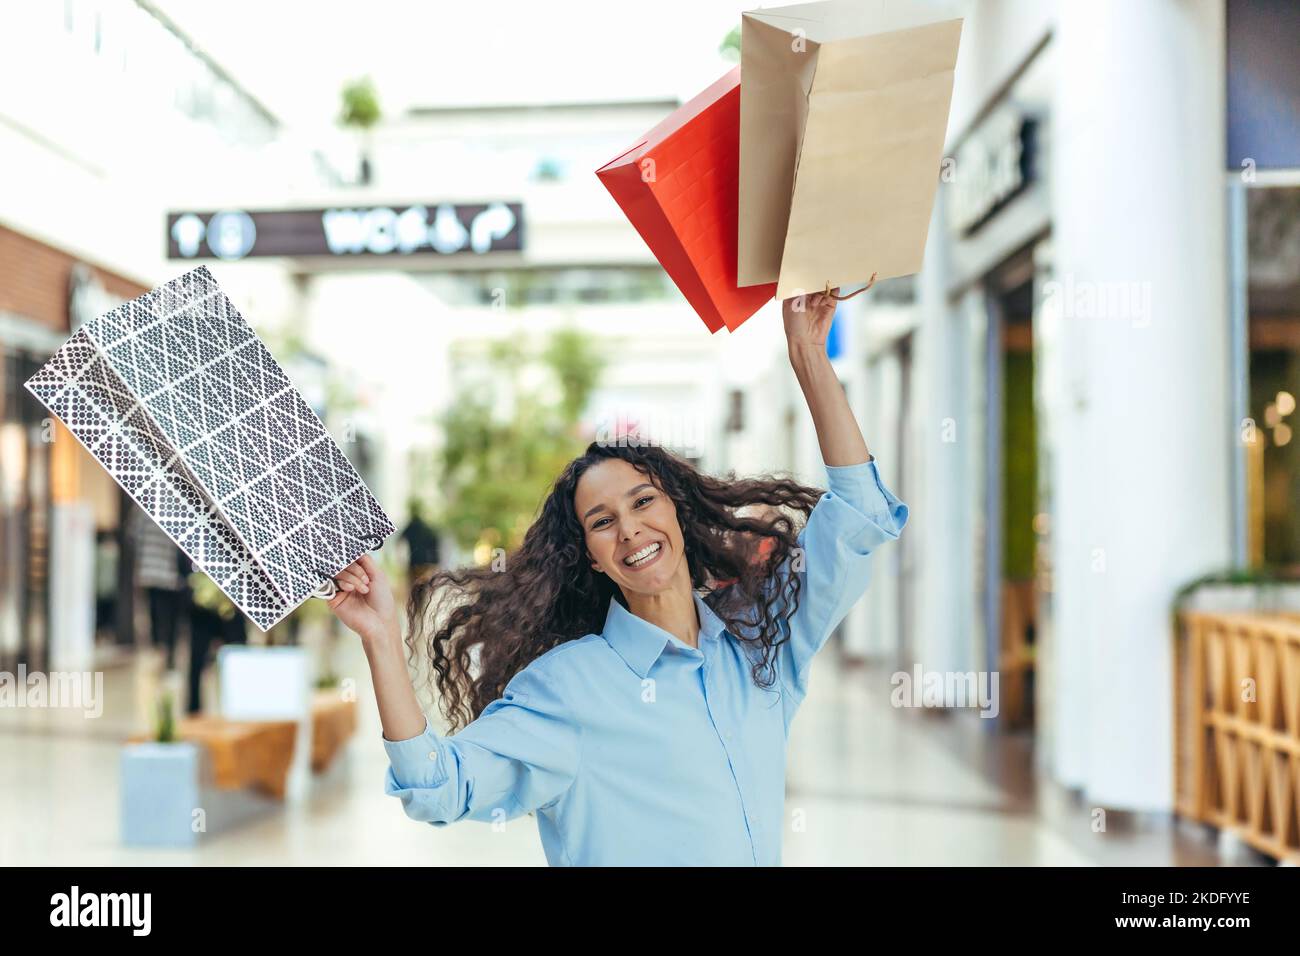 Happy shopper woman looking at camera and smiling, hispanic woman with curly hair dancing and jumping with pleasure, bought gifts on sale, portrait of happy shopping woman. Stock Photo